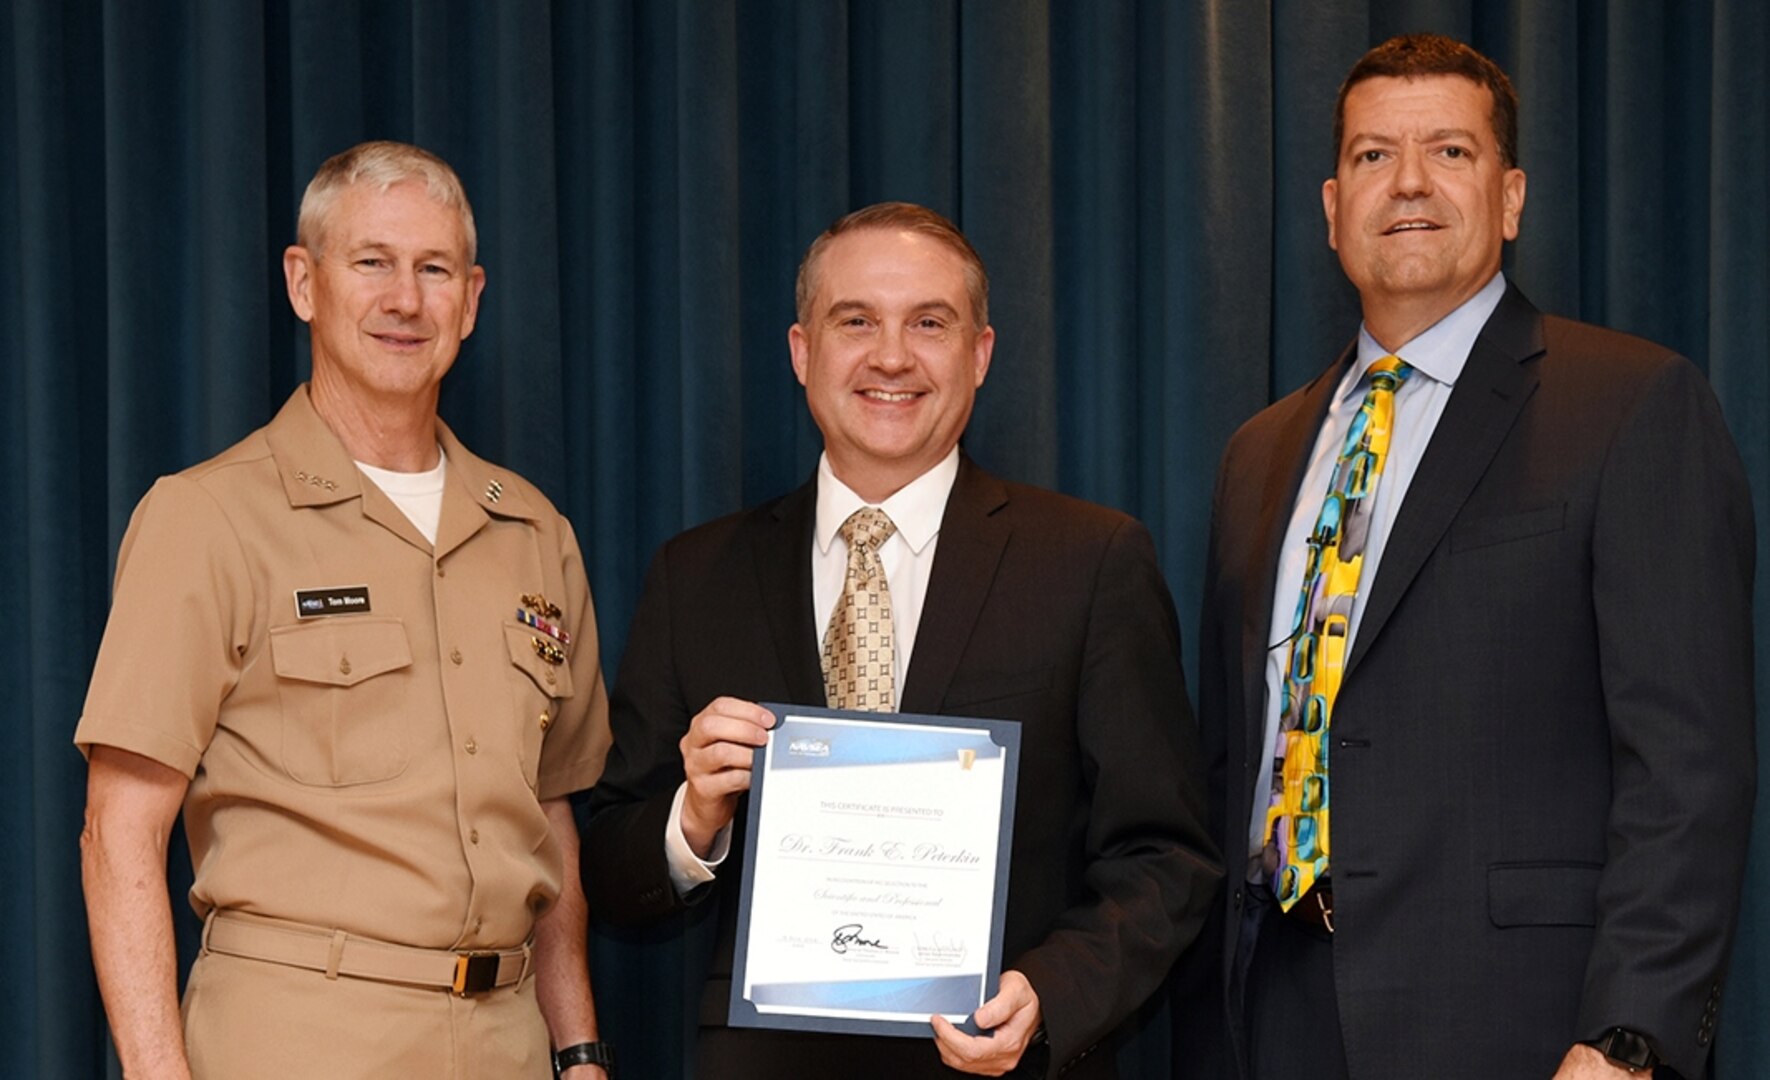 IMAGE: Vice Adm. Thomas Moore, commander of Naval Sea Systems Command (NAVSEA), and James Smerchansky, NAVSEA Executive Director, presented the Scientific and Professional Executive Award to NSWCDD engineer Dr. Frank Peterkin at a NAVSEA headquarters ceremony, June 18. 

As the Navy's Distinguished Engineer for Directed Energy, Peterkin is responsible for assessing directed energy efforts across the Navy, technology development, and warfighting applications and for providing strategic direction in the development of directed energy capabilities. Peterkin is the driving technical force behind the Navy Laser Family of Systems which will result in the fielding of lasers onto surface ships.